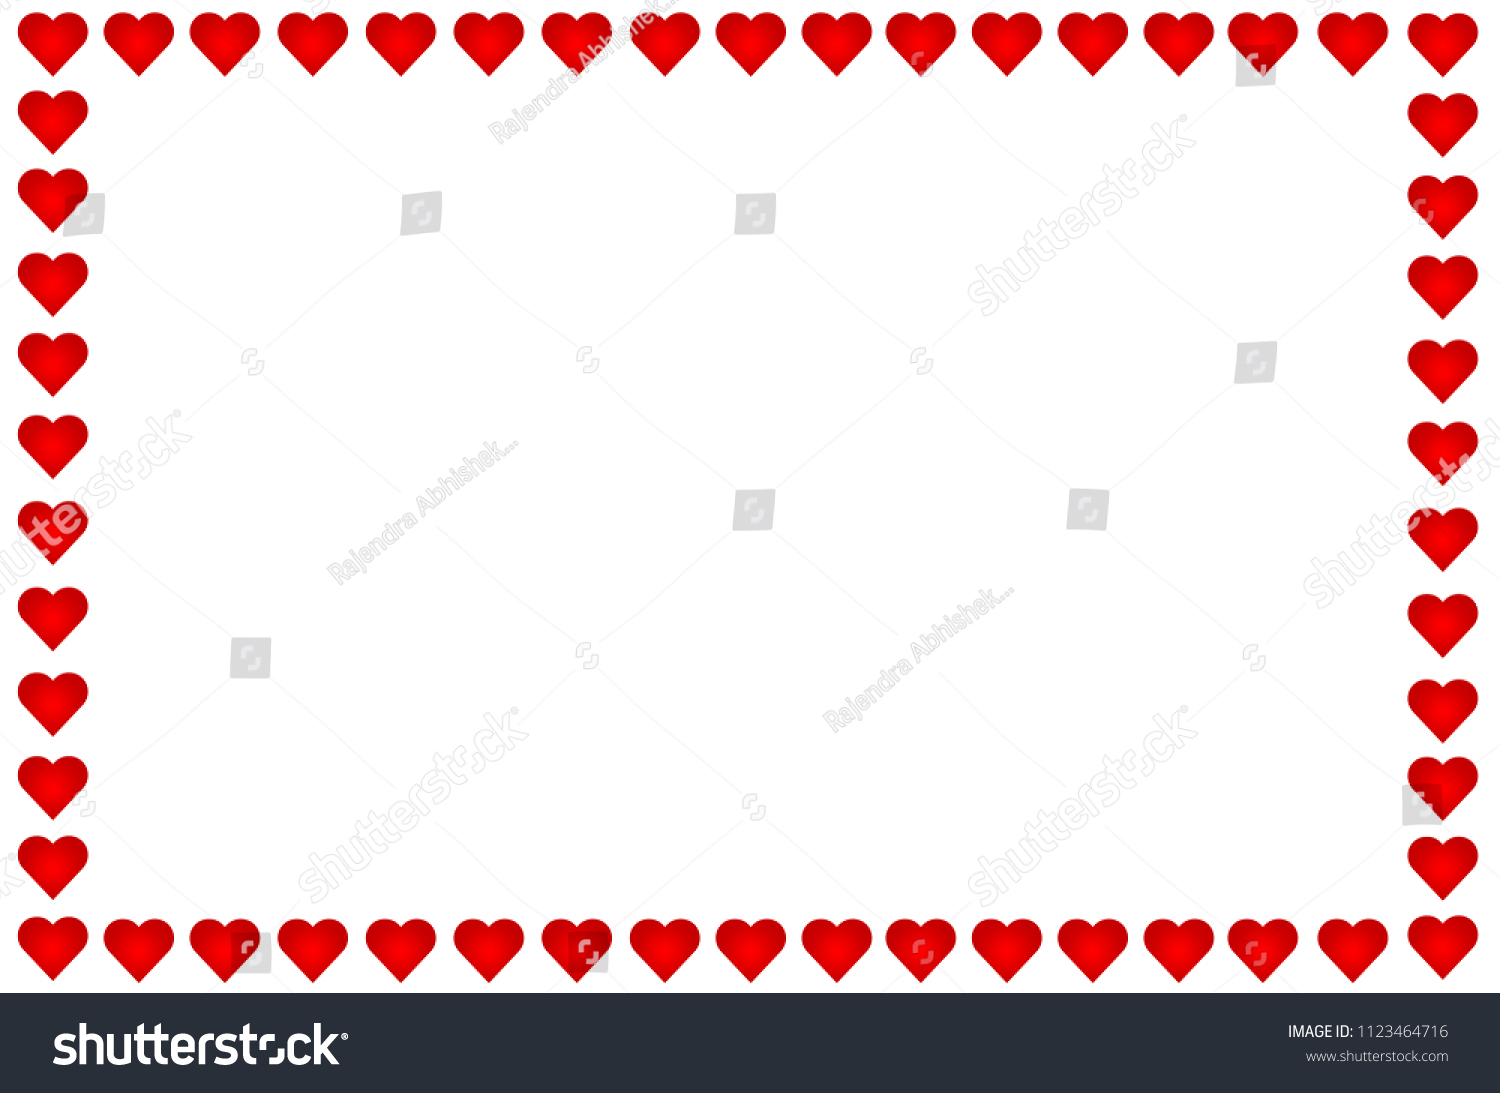 Hearts frame with white background #1123464716